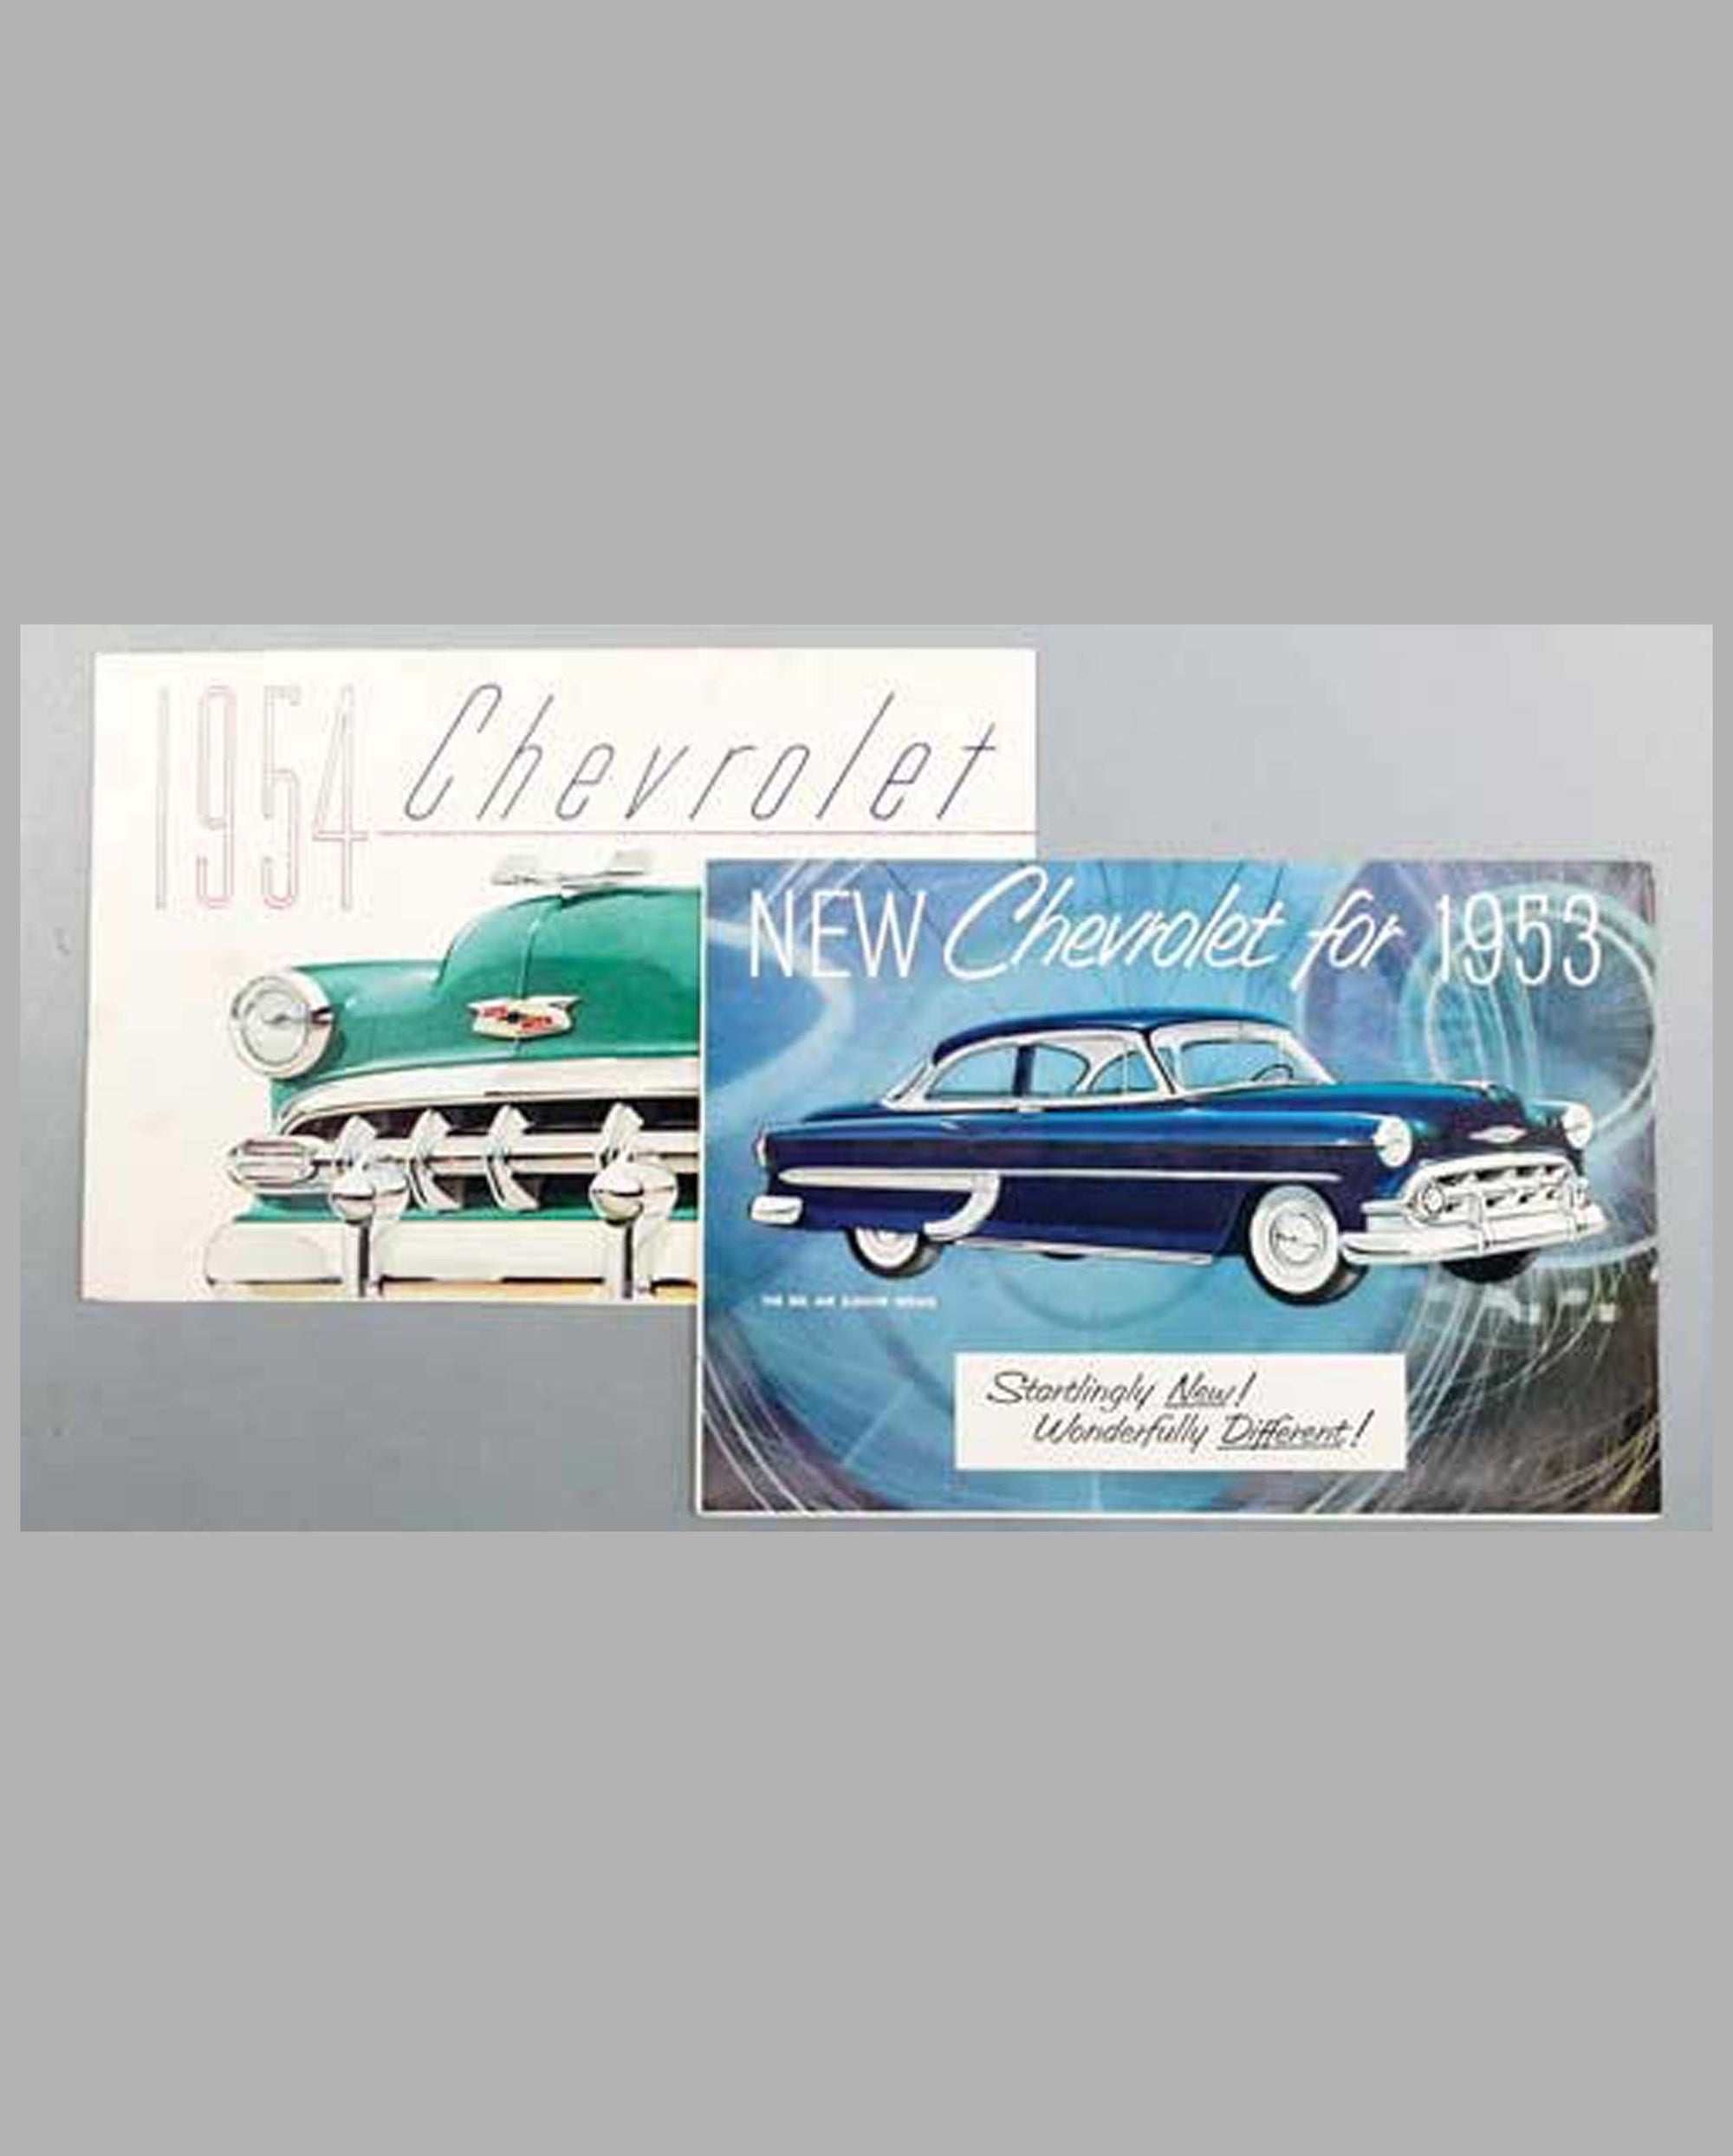 Two Chevrolet original color sales folders, 1953 and 1954